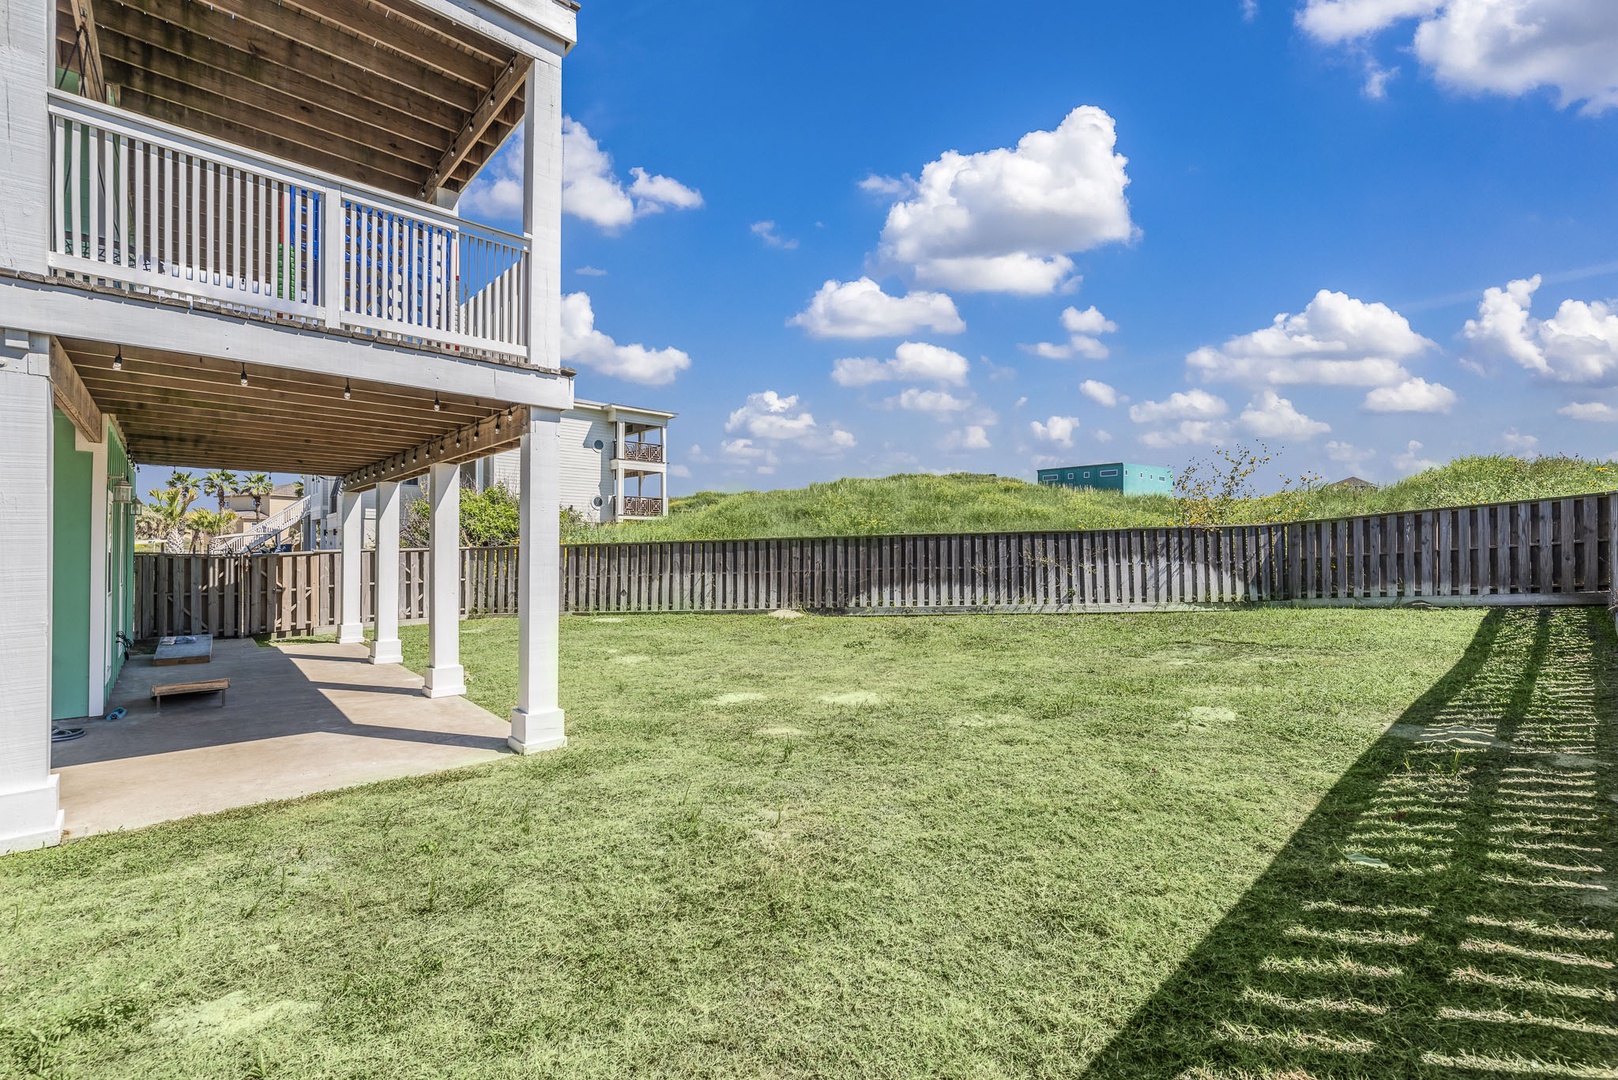 The back yard offers plenty of space for outdoor fun and play